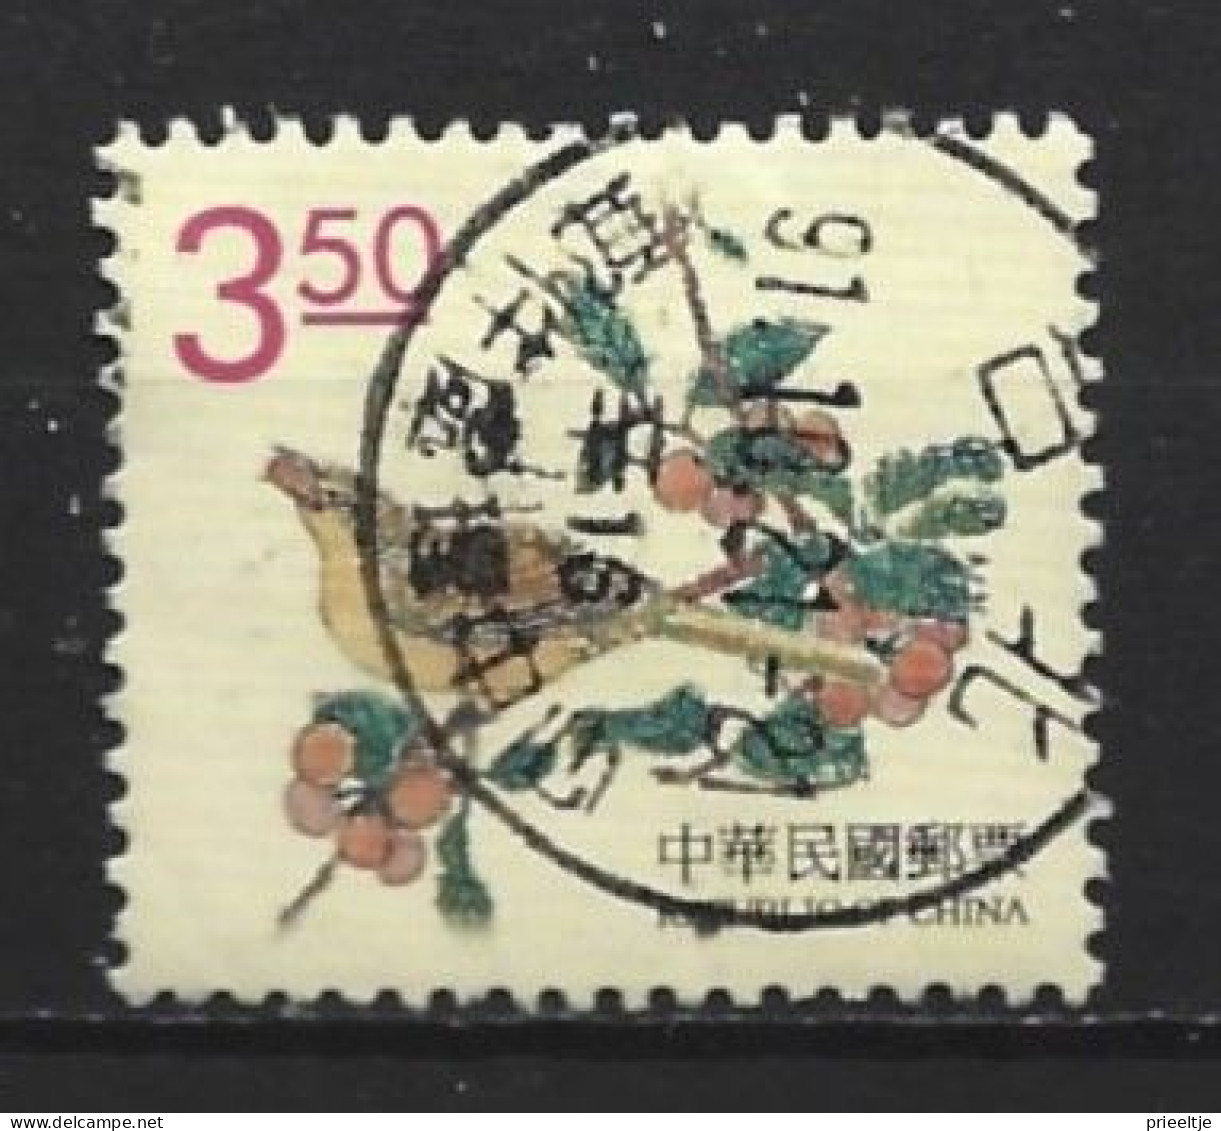 Taiwan 1999 Bird Y.T. 2431 (0) - Used Stamps